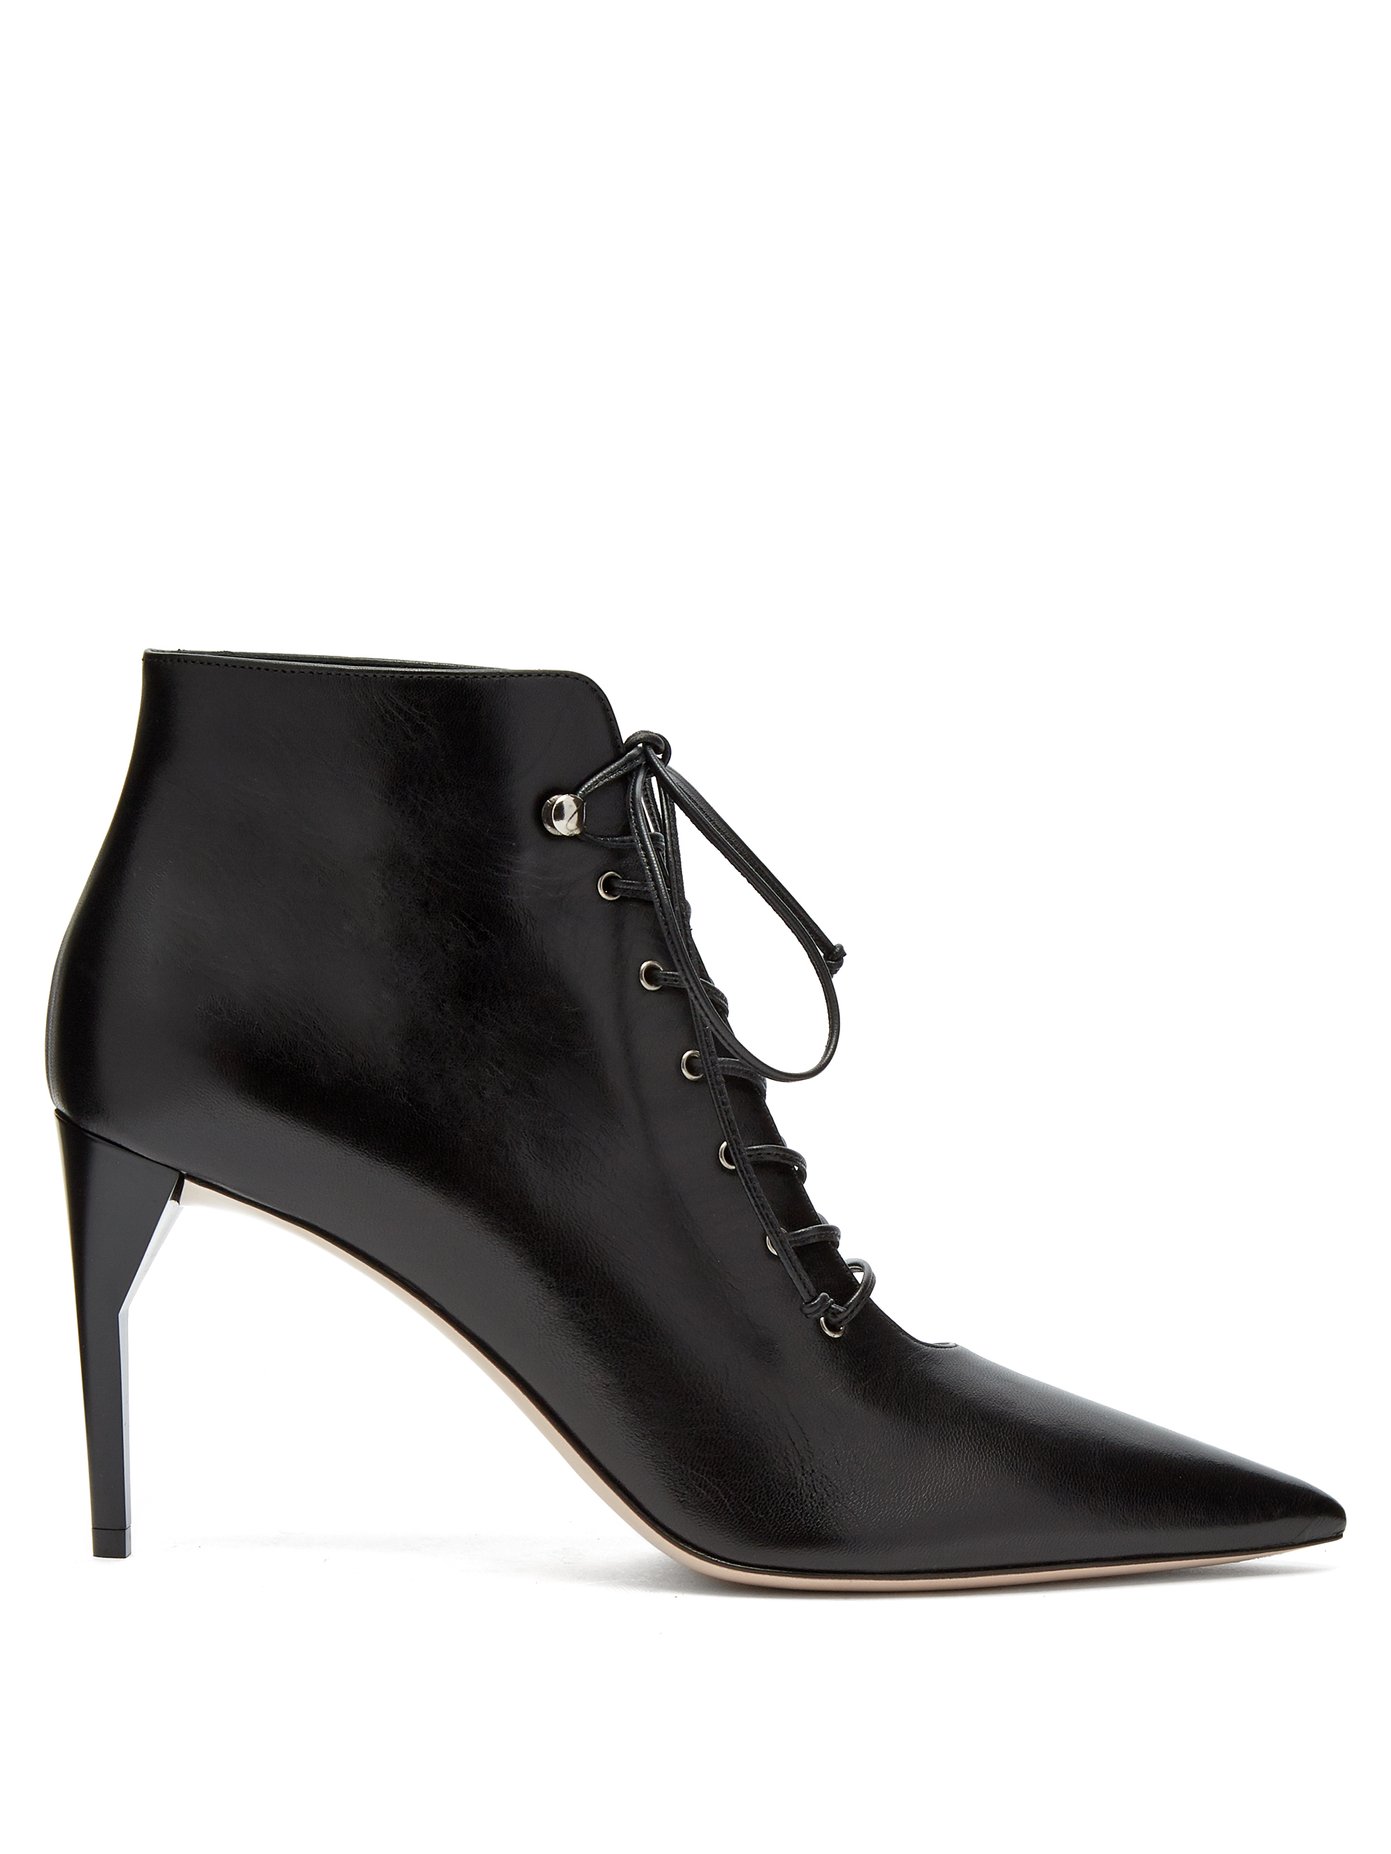 miu miu lace up ankle boots